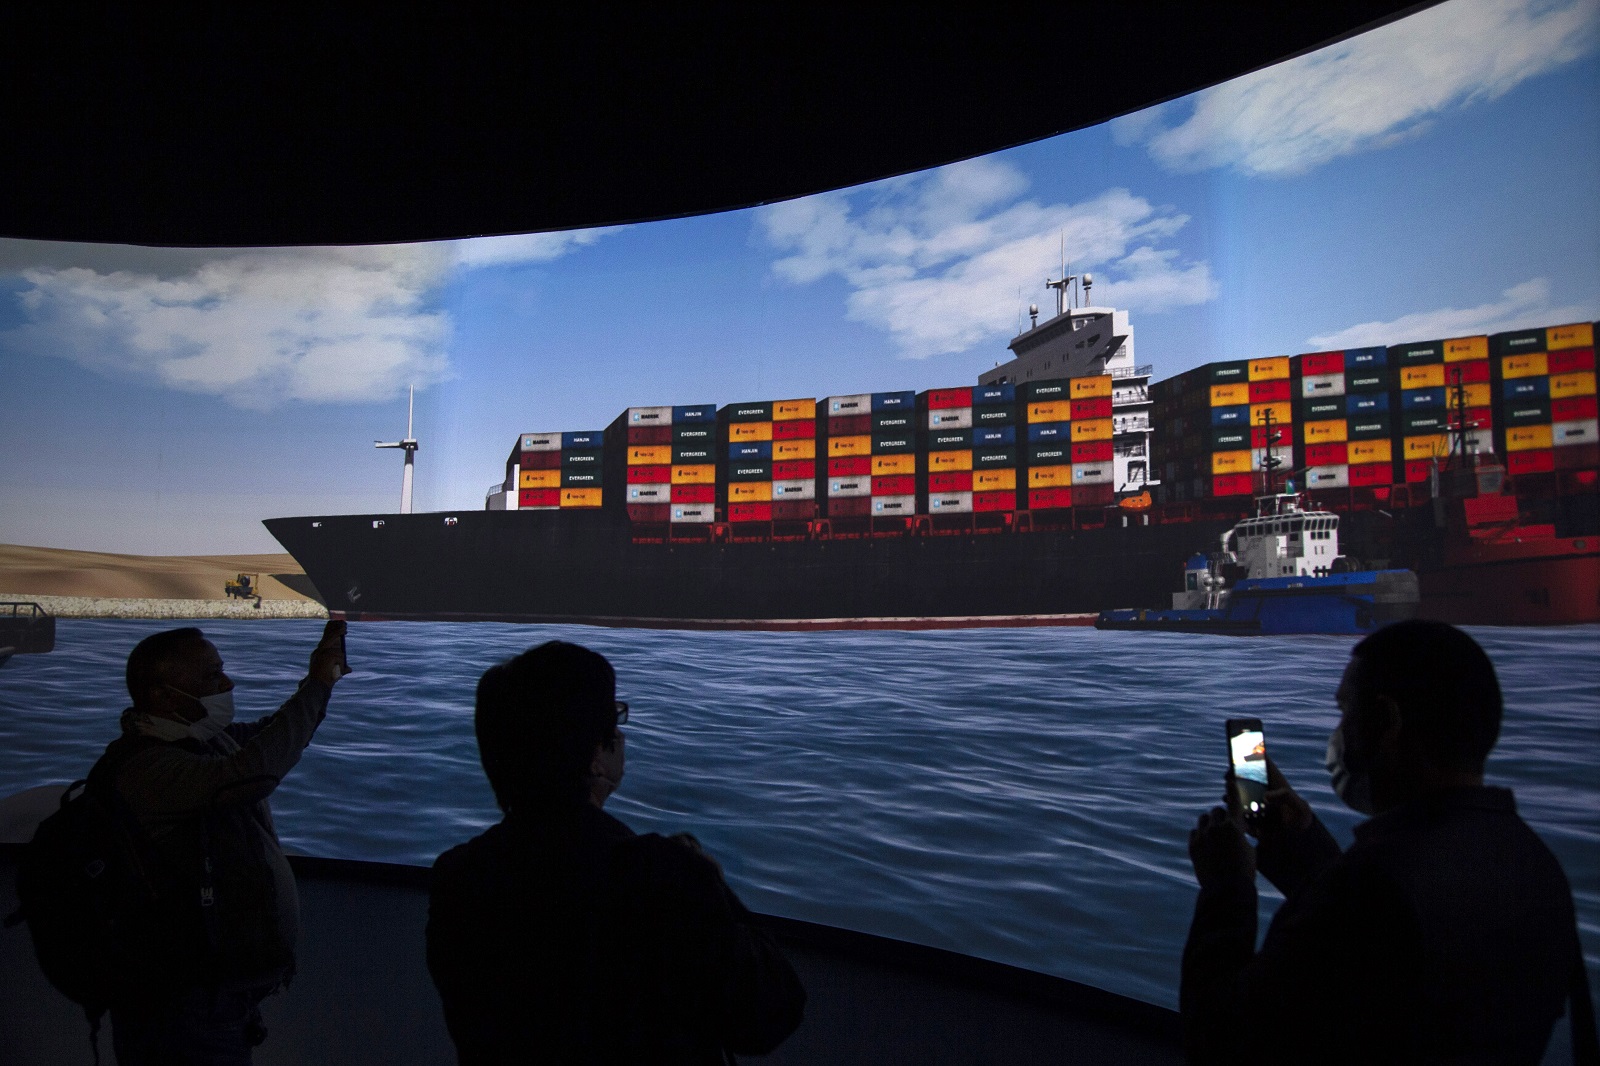 epa09104782 Reporters stand in front of a screen displaying a simulation of the pulling of Ever Given container ship in the Suez Canal, demonstrated during a press conference at the Maritime Training and Simulation Centre of the Suez Canal Authority in Ismailia, Egypt, 29 March 2021. The Suez Canal Authority announced on 29 March that the large container ship, which ran aground in the Suez Canal on 23 March, was partly refloated after responding to the pulling maneuvers and the back of the ship is now 102 meters away from the bank of the canal.  EPA/Mohamed Hossam